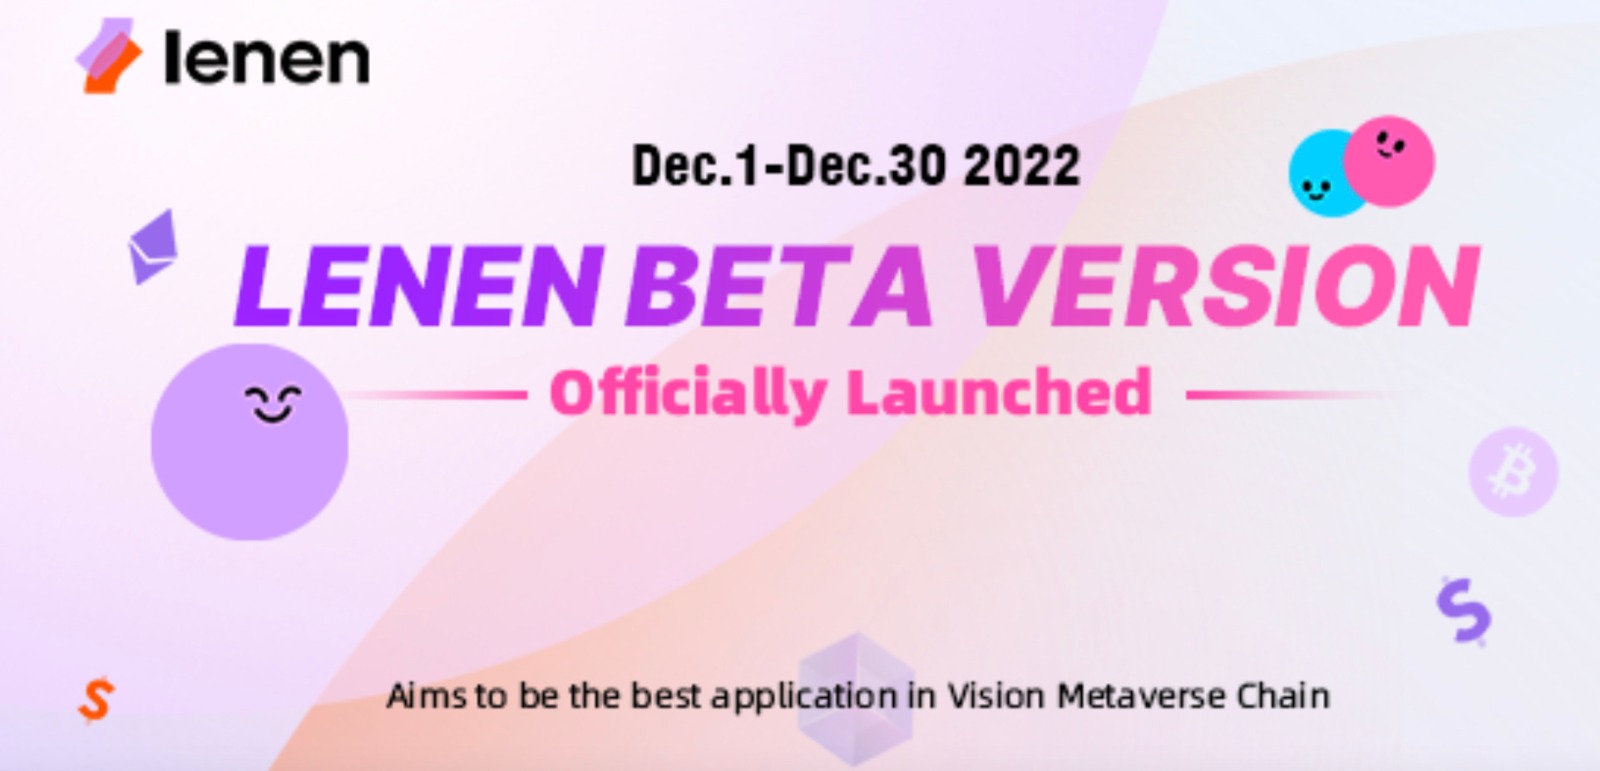 , The Lenen Protocol Beta Version Officially Launched, Providing a Decentralized Lending Service for the Vision Metaverse